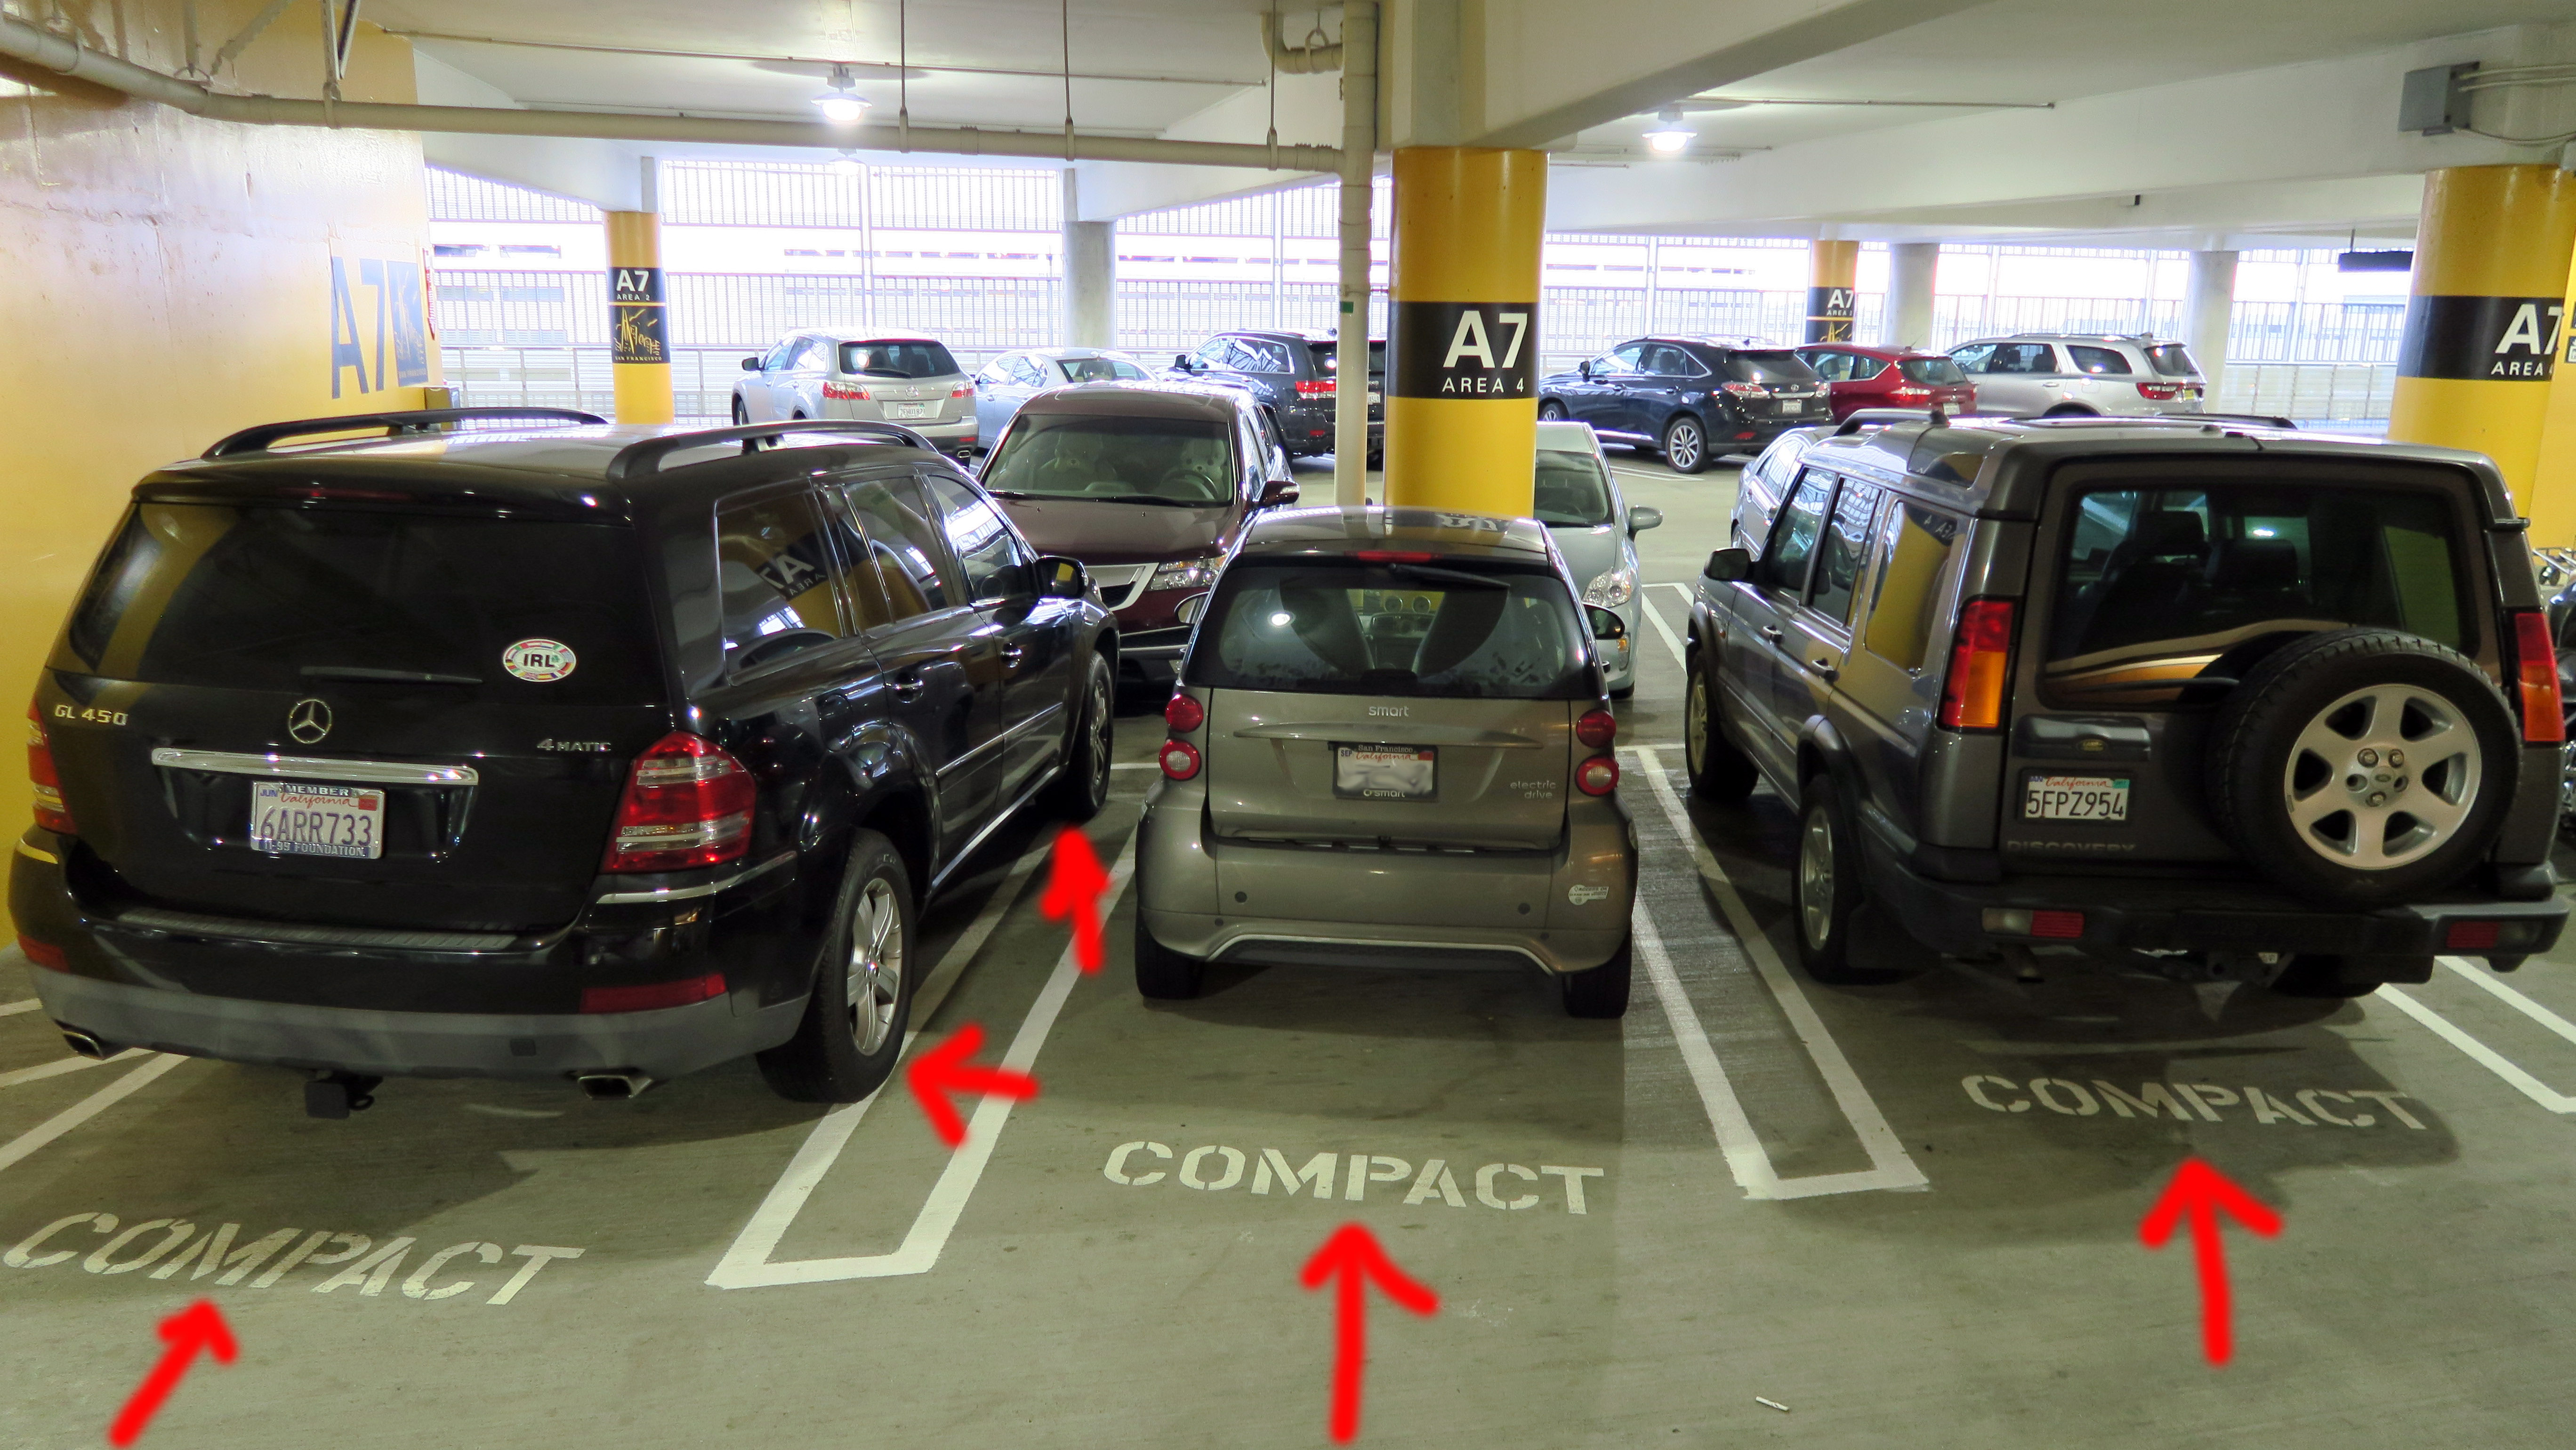 Can I Park in Compact Parking